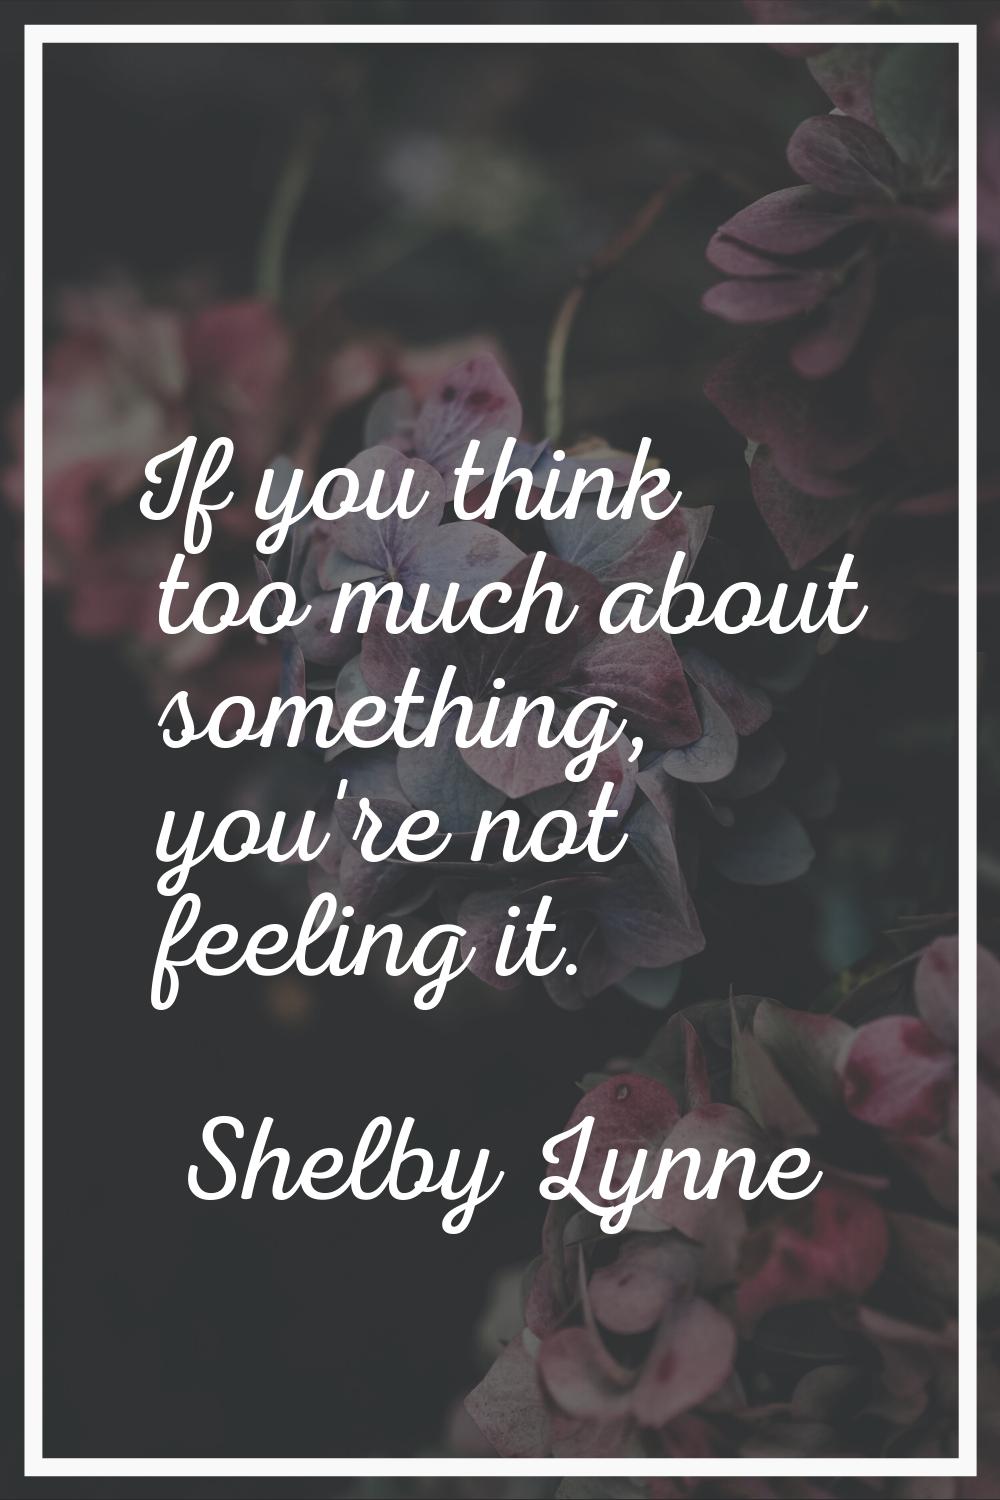 If you think too much about something, you're not feeling it.